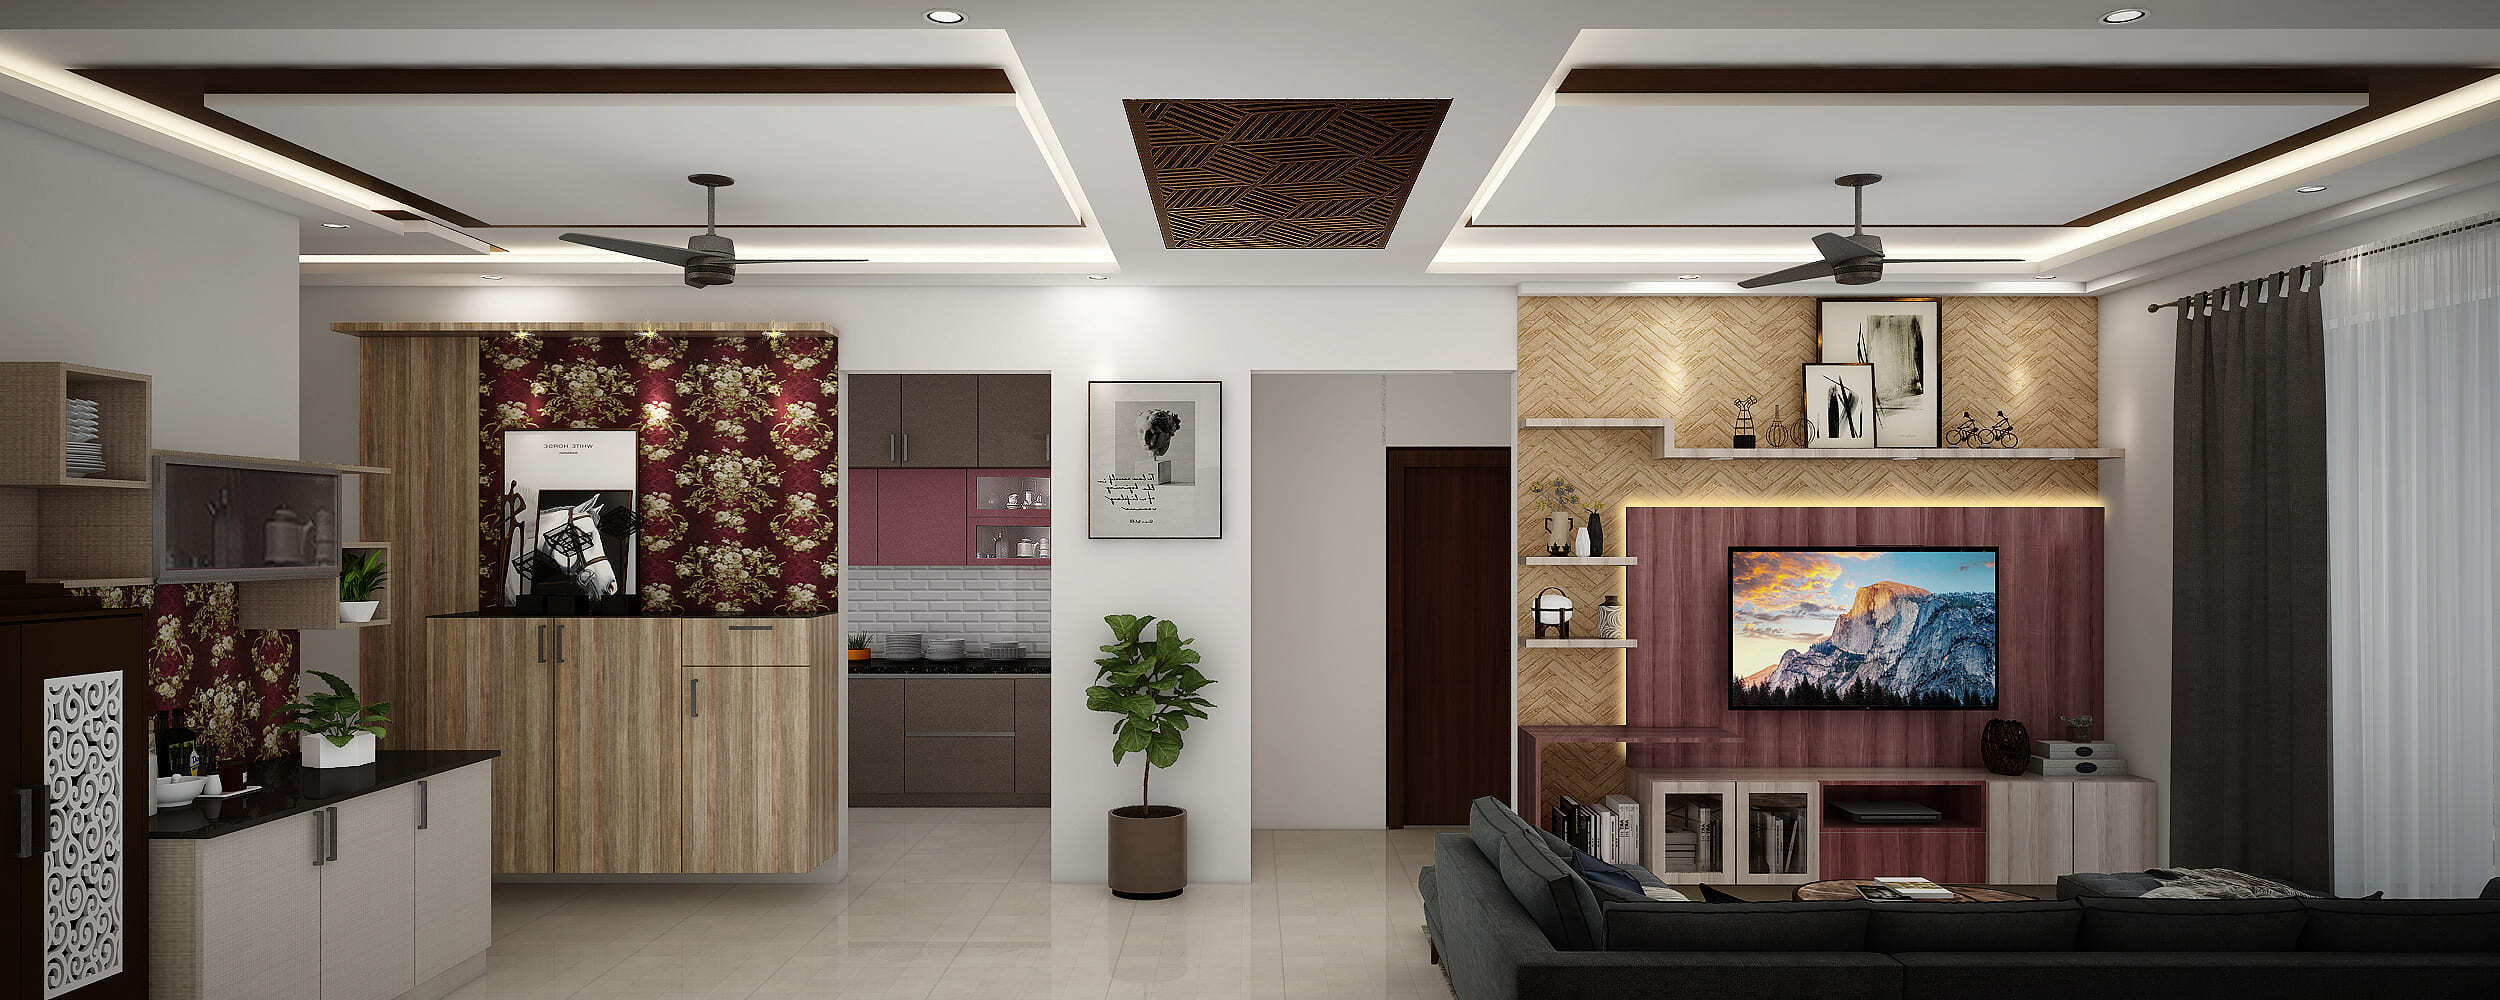 Home interior designers in Bangalore - LIGHTING AND FALSE CEILING IDEAS FOR YOUR LIVING ROOM